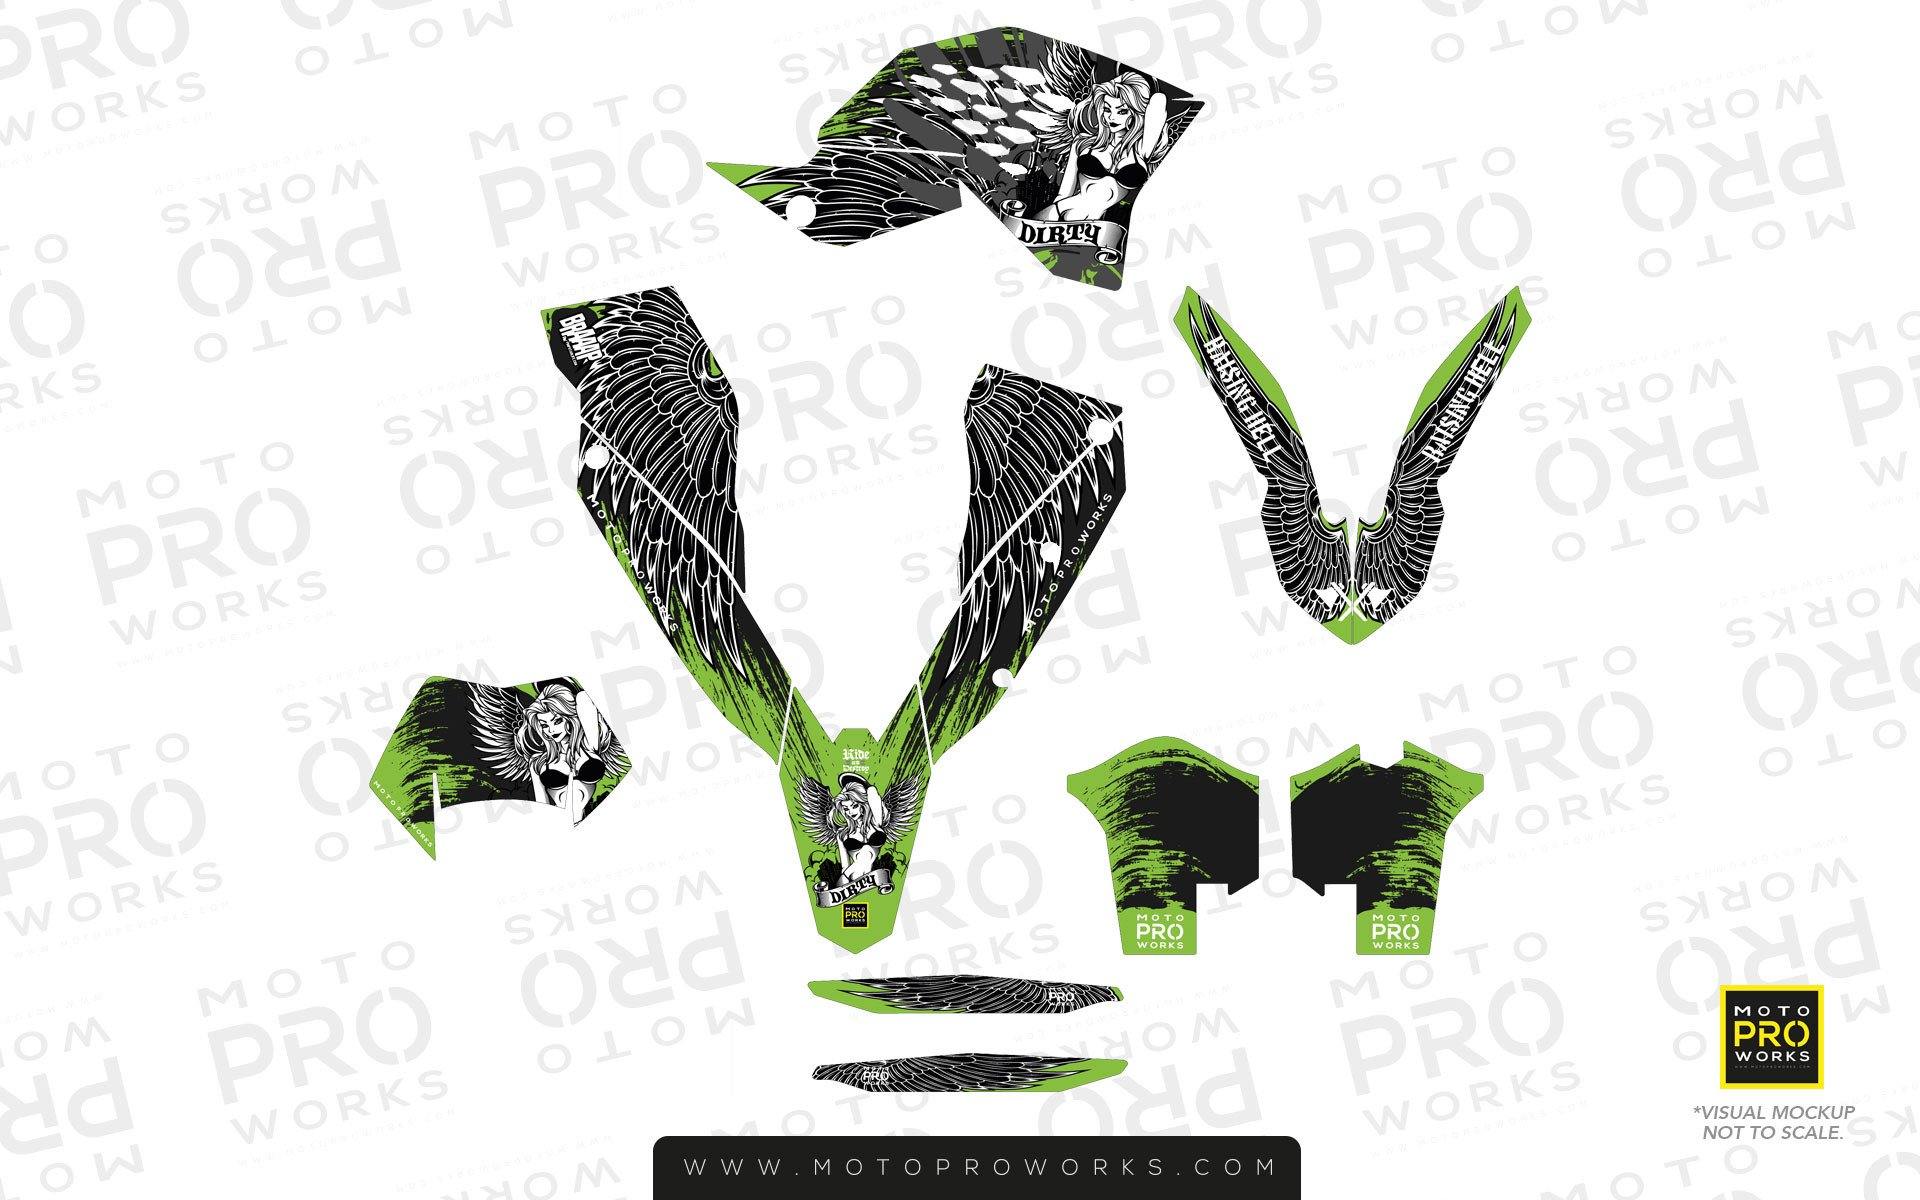 KTM GRAPHIC KIT - "Dirty Angel" (green) - MotoProWorks | Decals and Bike Graphic kit